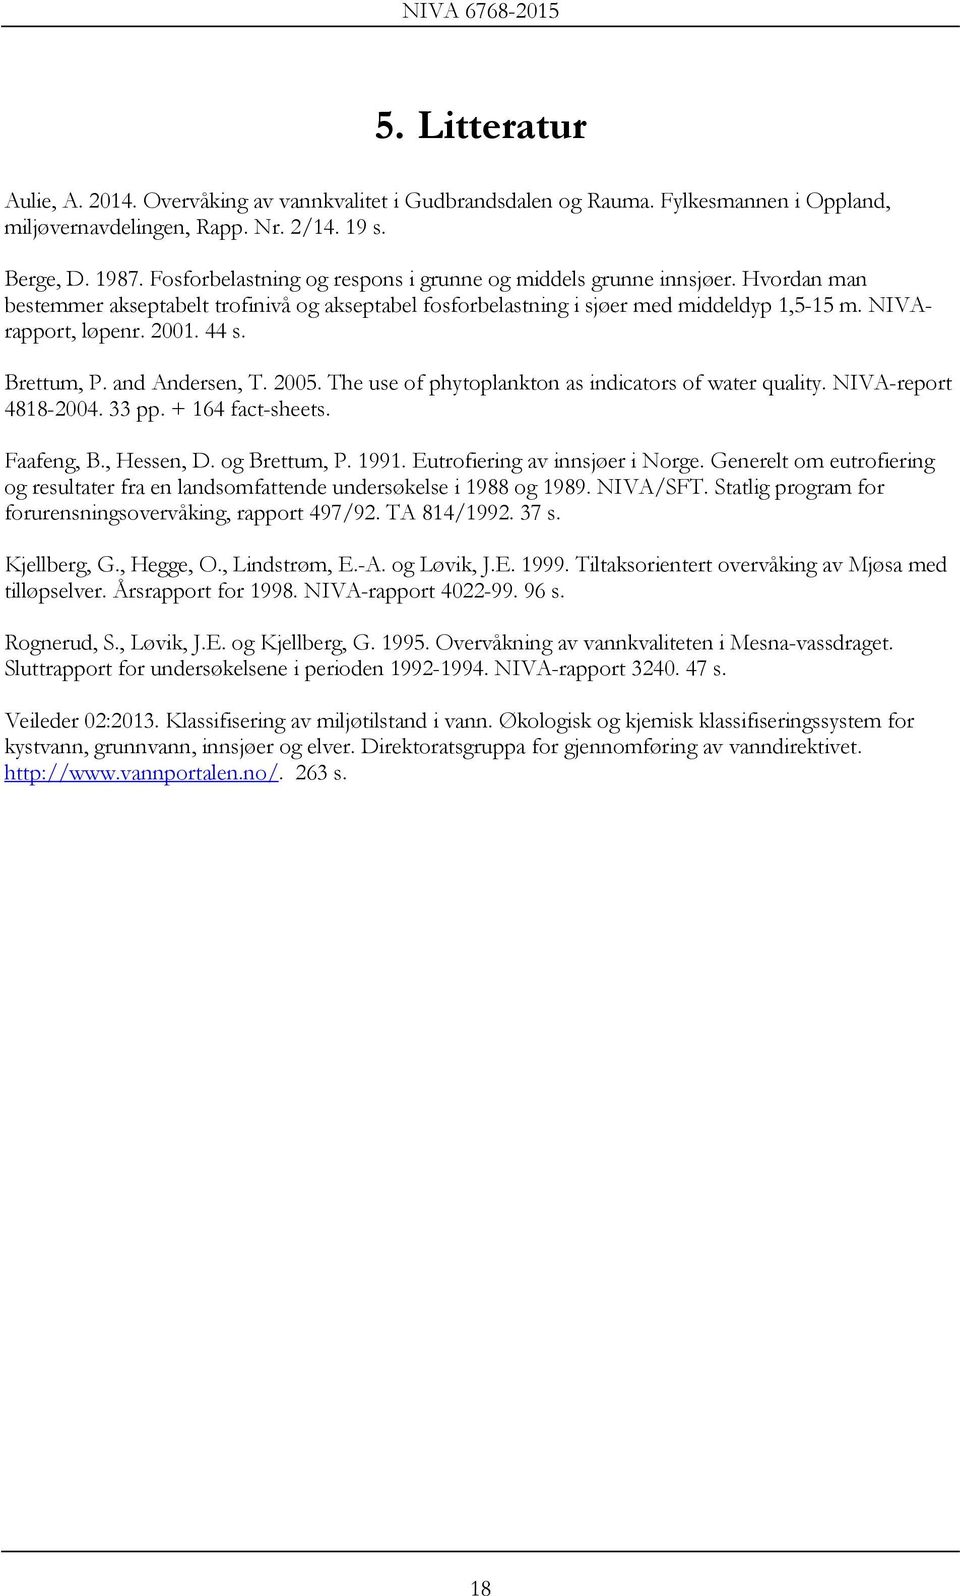 44 s. Brettum, P. and Andersen, T. 2005. The use of phytoplankton as indicators of water quality. NIVA-report 4818-2004. 33 pp. + 164 fact-sheets. Faafeng, B., Hessen, D. og Brettum, P. 1991.